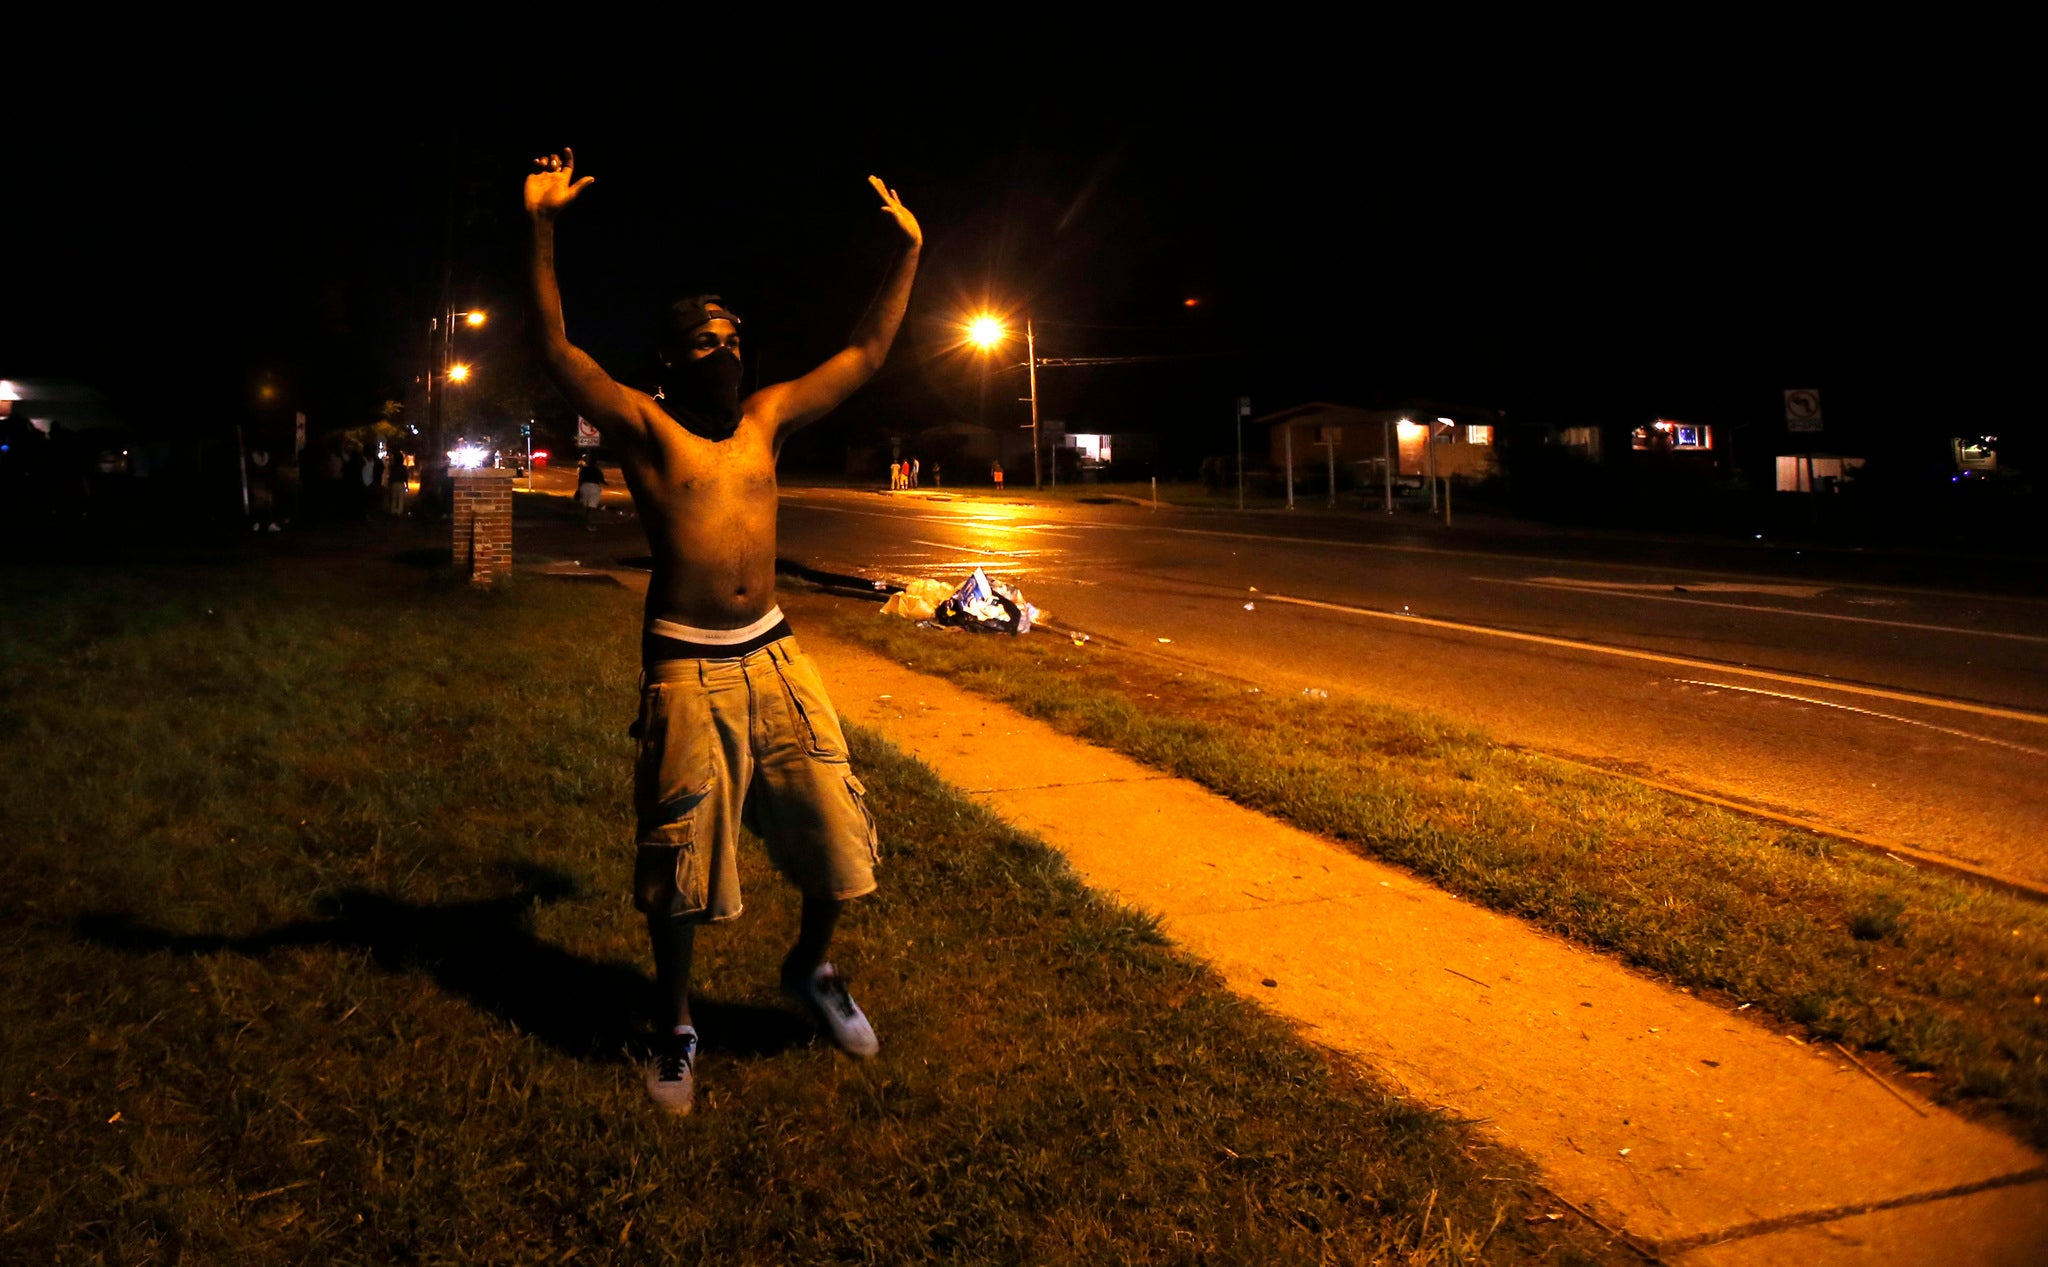 A demonstrator raises his hands in front of of a police officer in Ferguson, Missouri August 11, 2014.